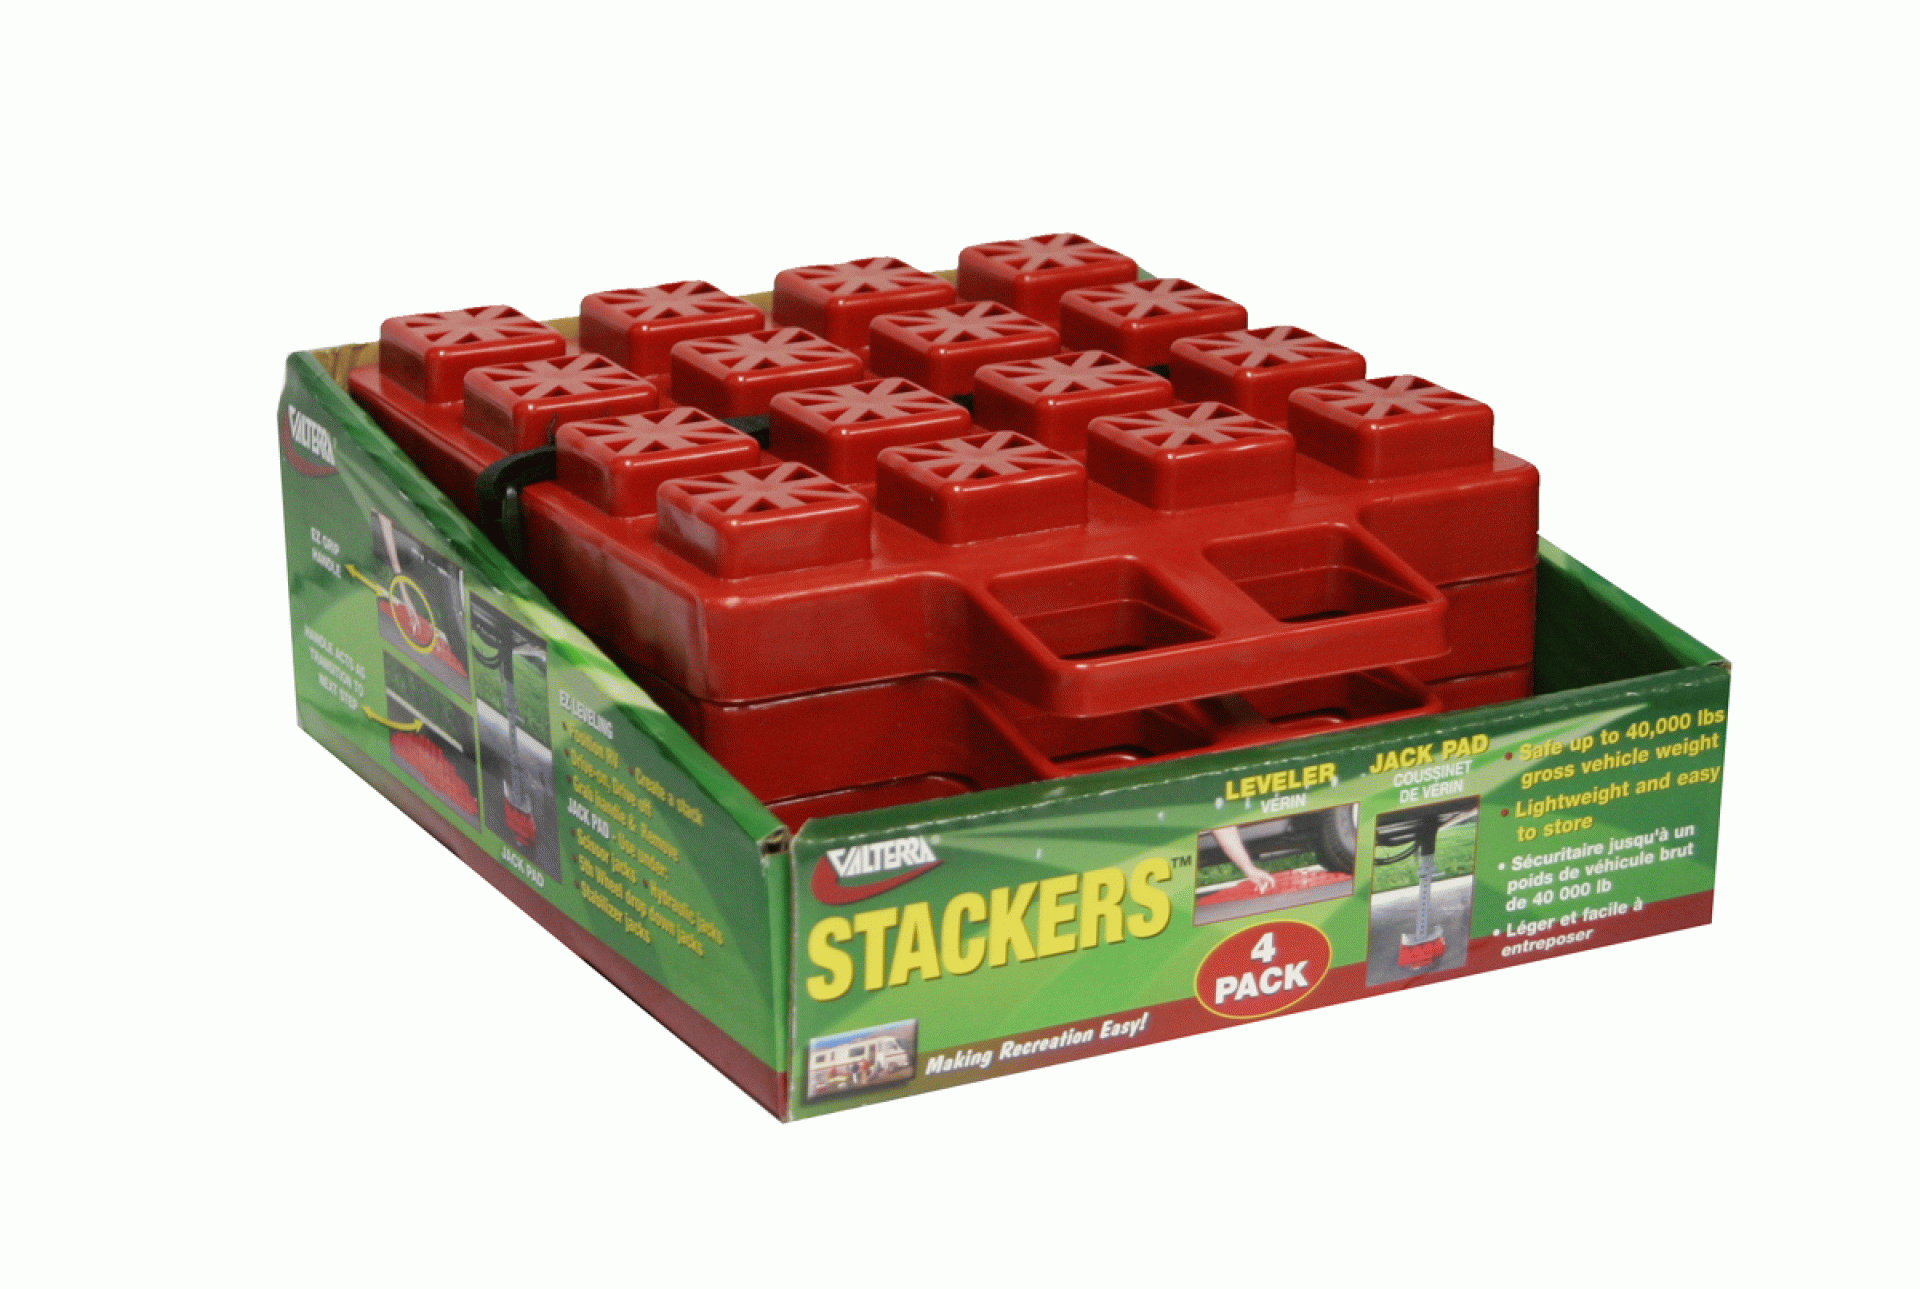 VALTERRA PRODUCTS INC. | A10-0916 | Stackers 4 Pack